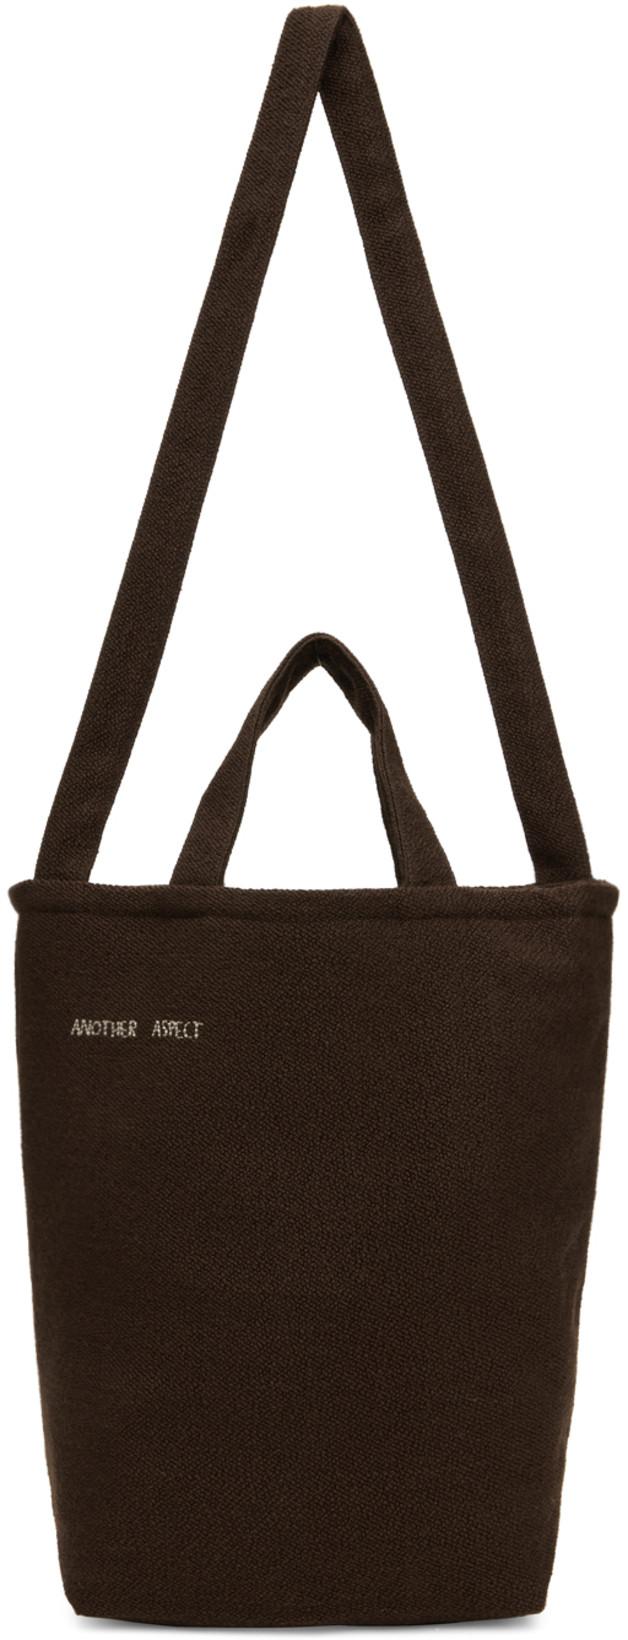 Brown 1.0 Tote by ANOTHER ASPECT